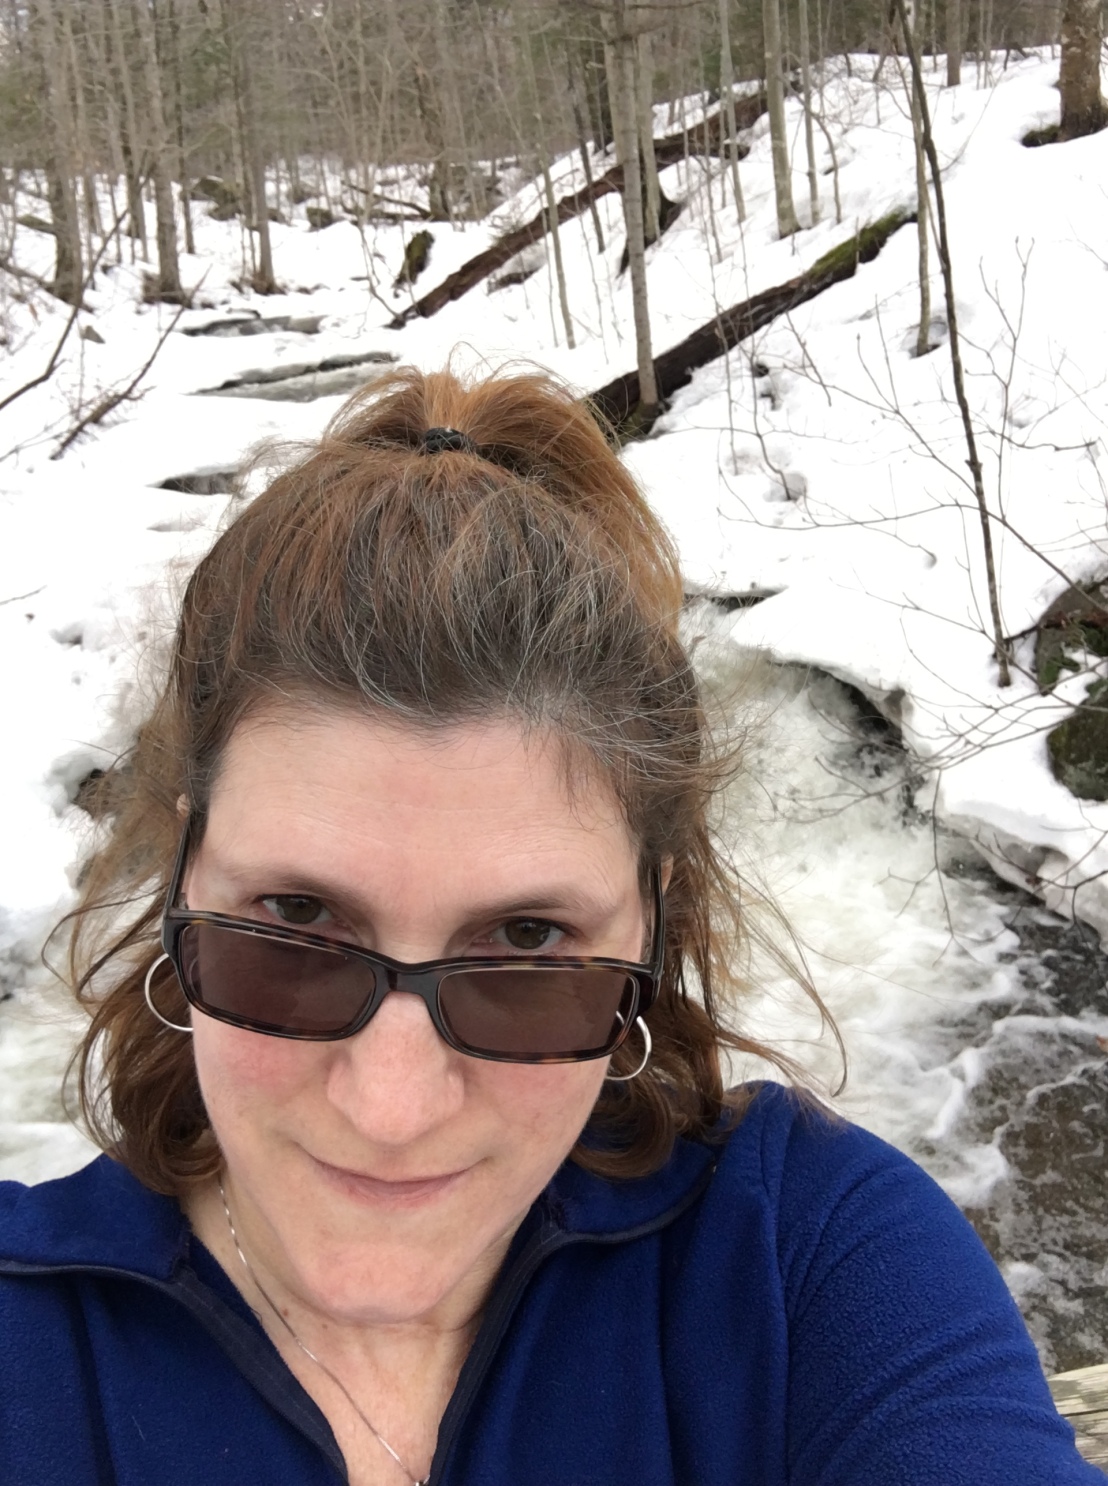 Mom takes a selfie on Long Trail in VT